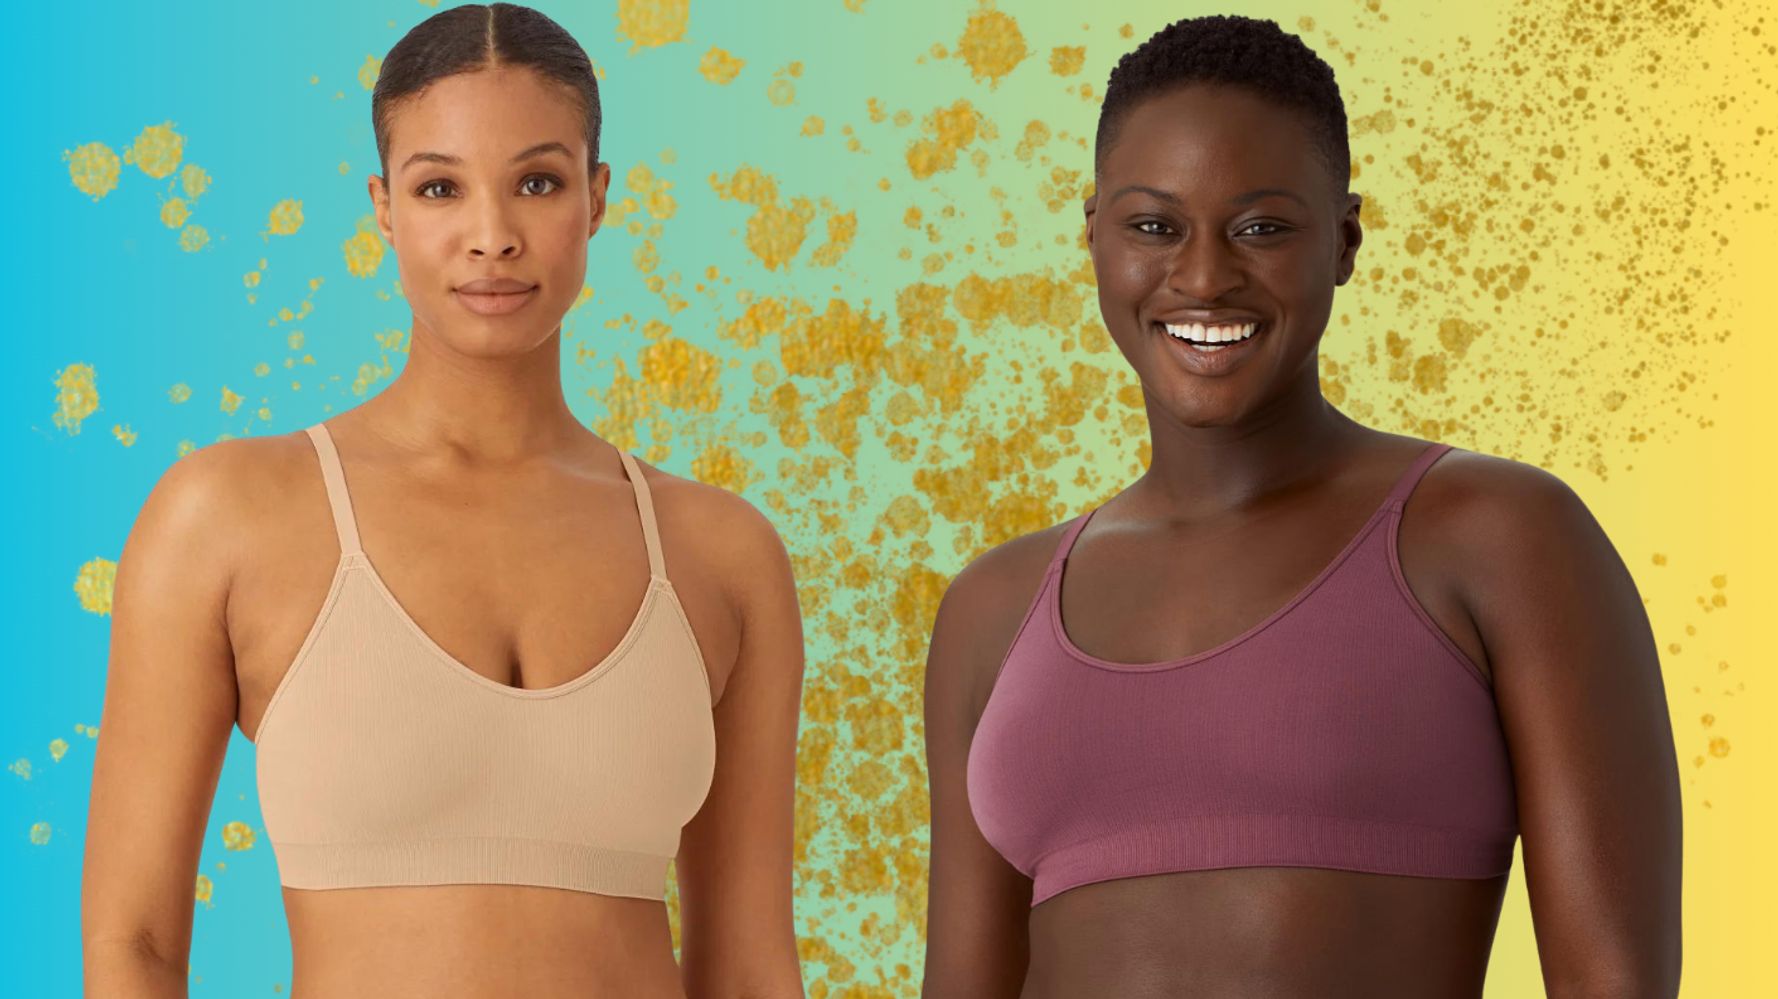 1,500 Real Customers Helped Make This Comfy Bra That Restored My